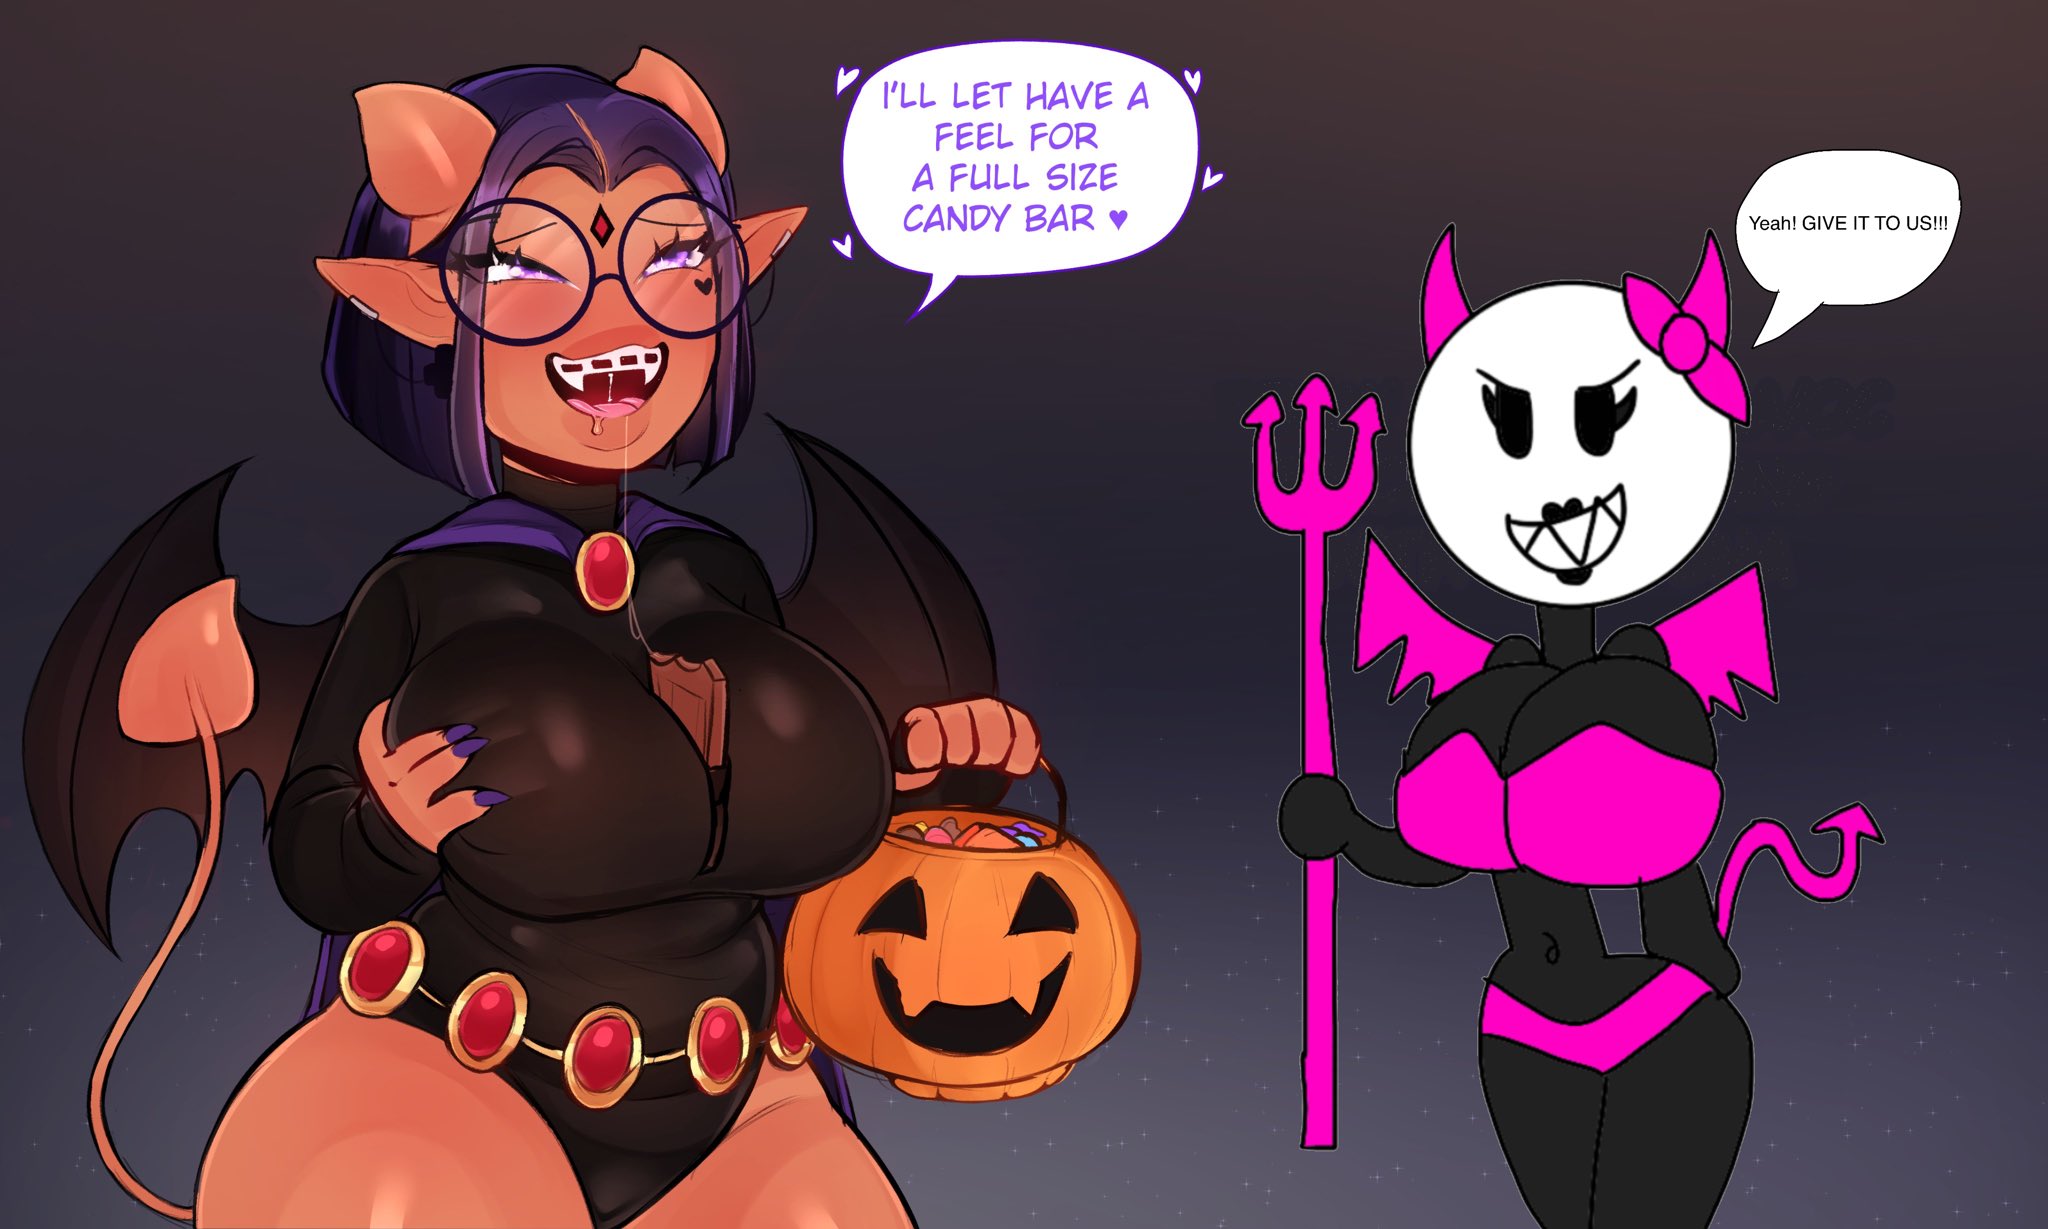 GameBonnieAdvance 🔞 (BDAY in 6 days) on X: Devil Pivotette goes Trick or  Treating with Demon RGBSona t.coE2aBFcZPYh  X